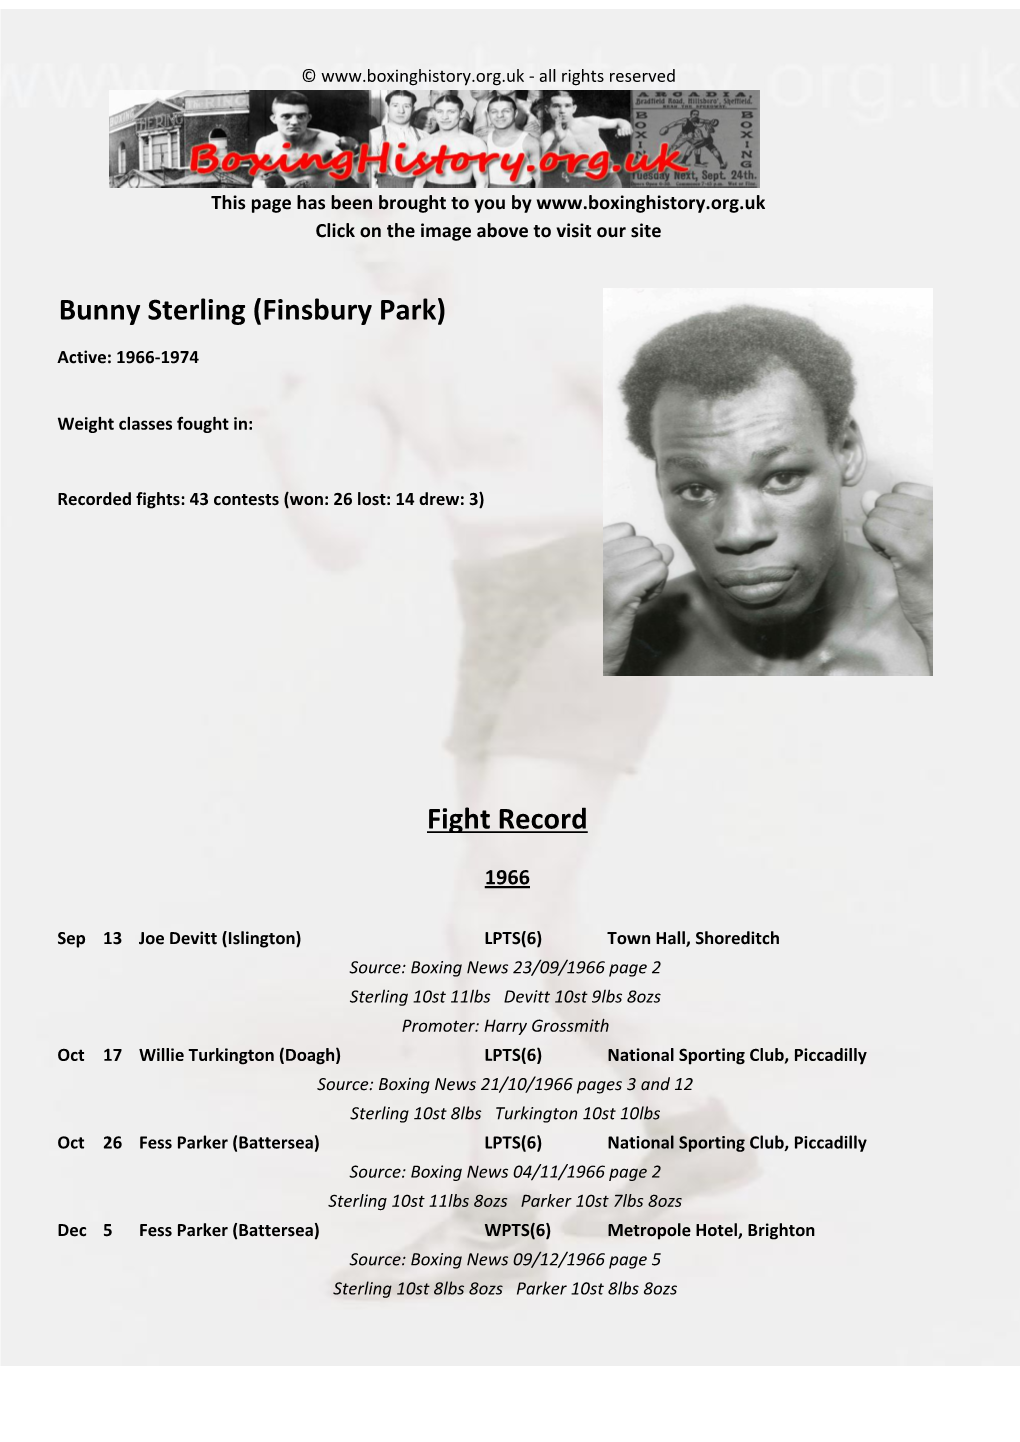 Fight Record Bunny Sterling